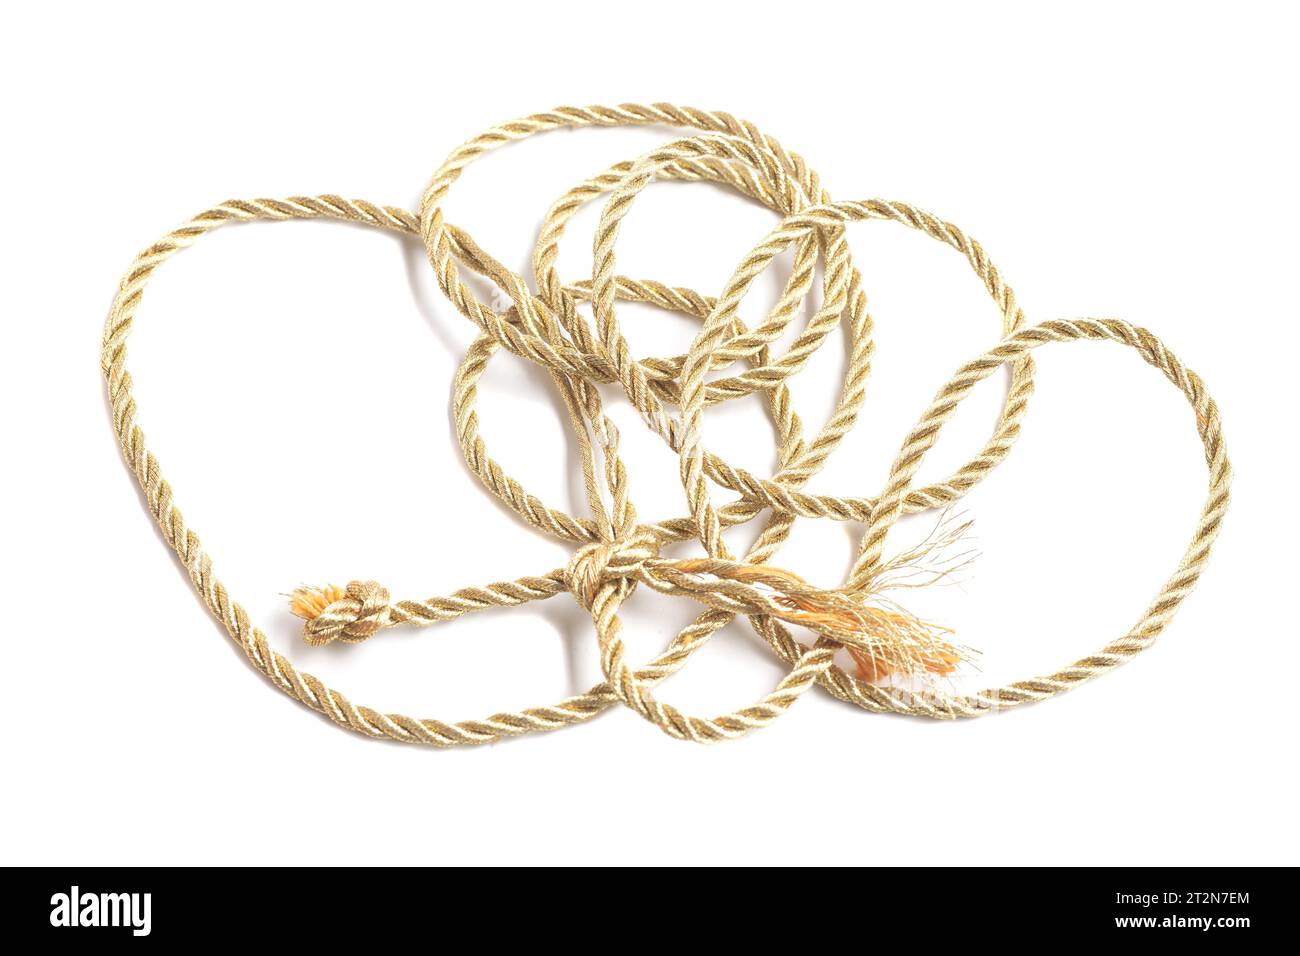 Golden rope isolated on a white background. Stock Photo